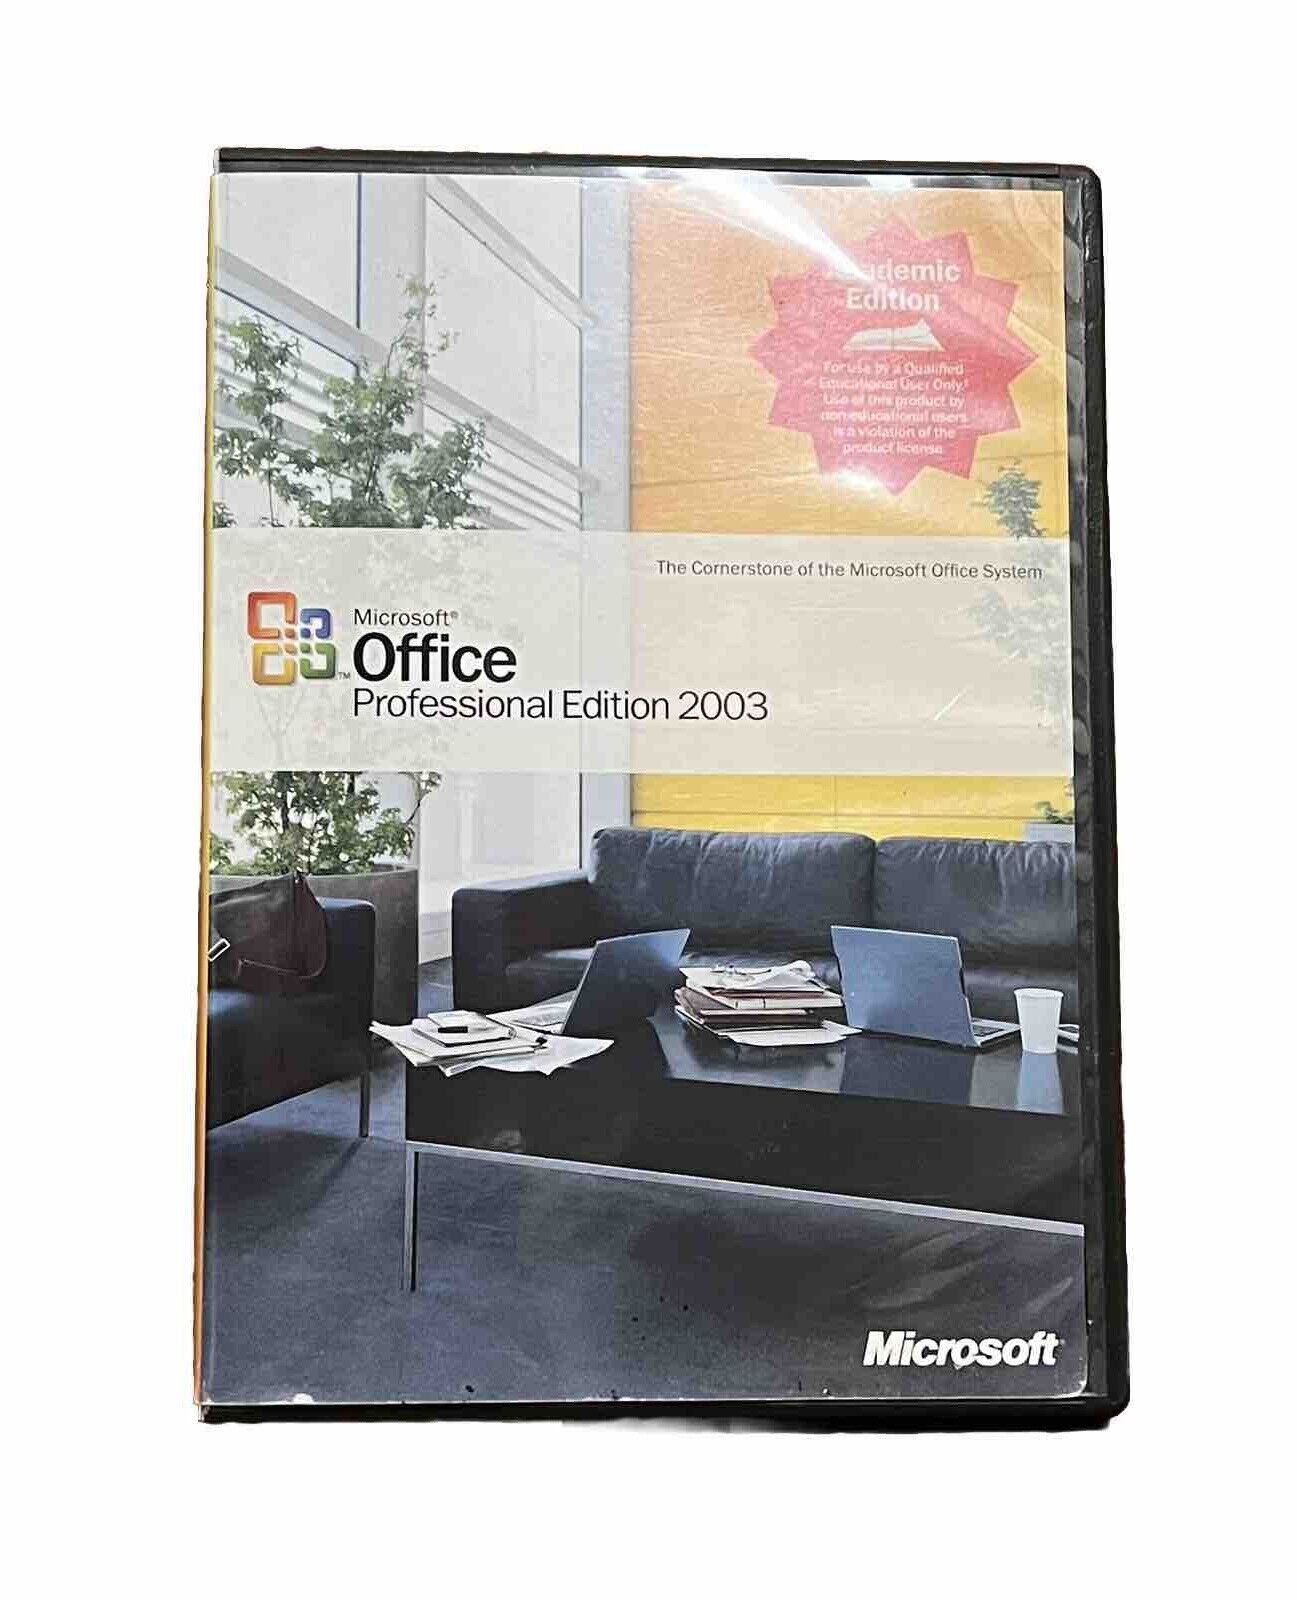 Microsoft Office 2003 Professional Edition w/ Product Key and Manual 2 Discs VGC